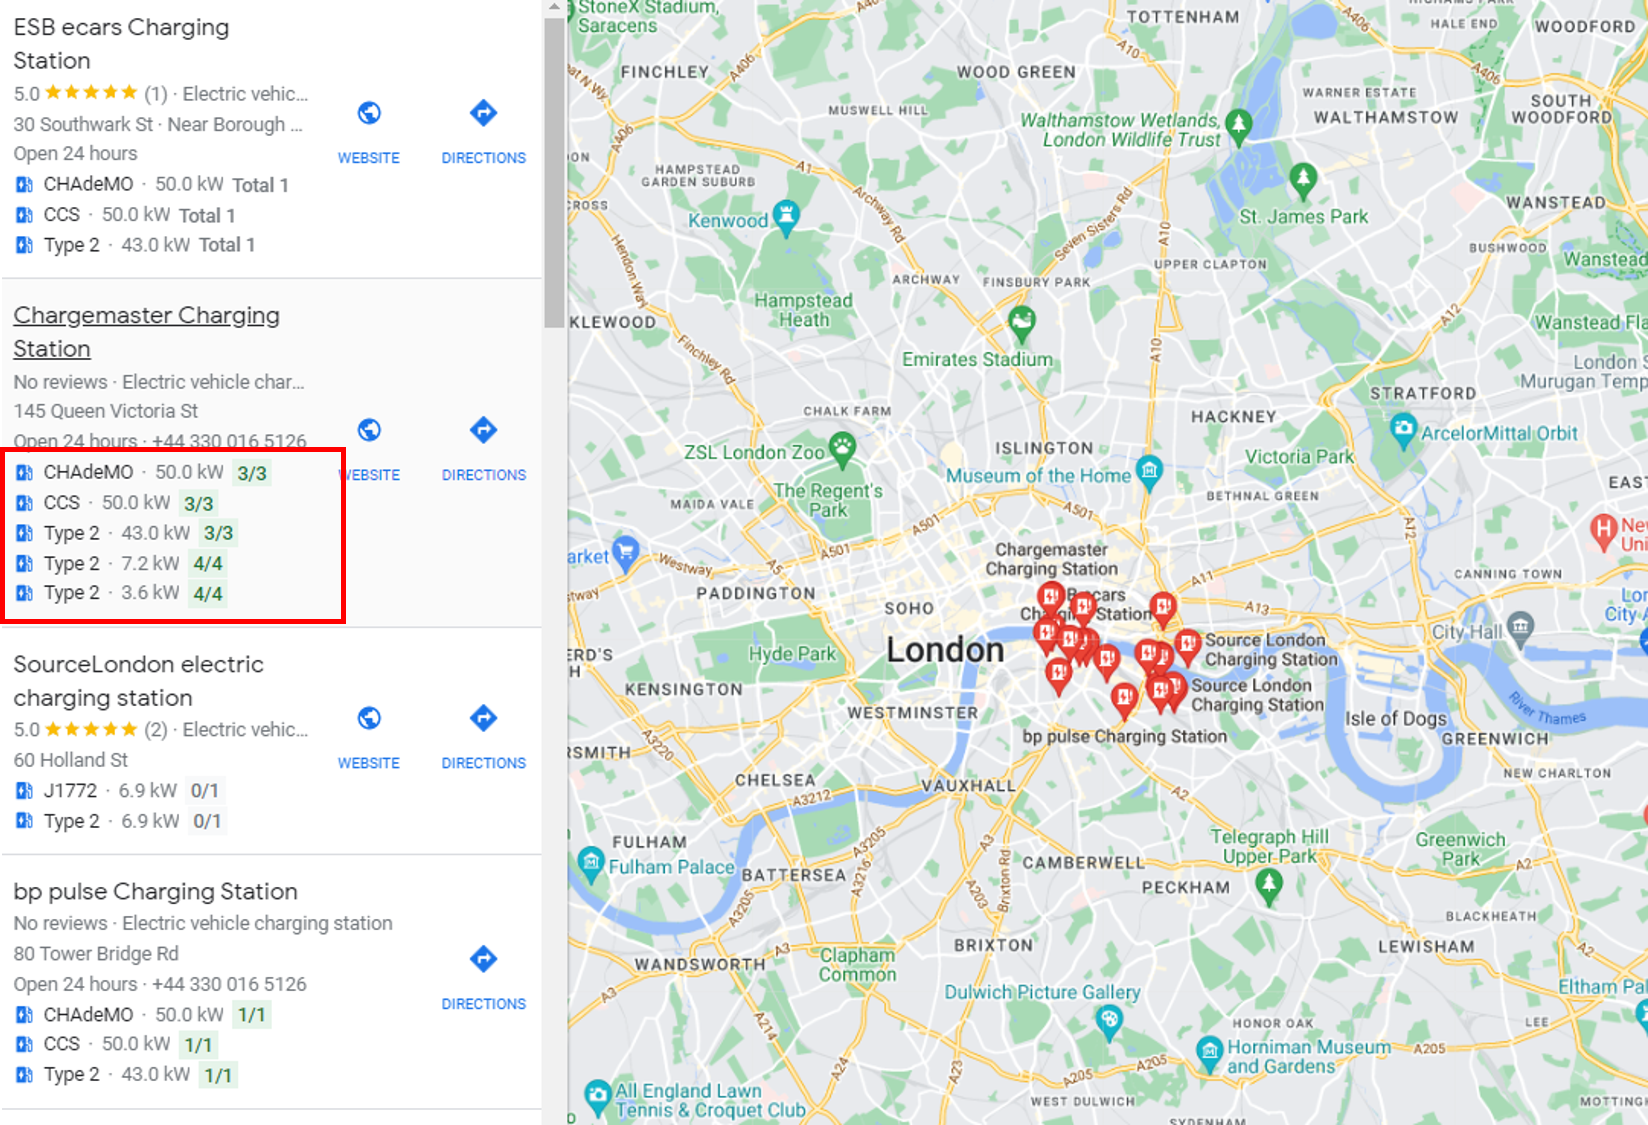 Google Maps showing the location and detailed information about electric vehicle charging stations in London